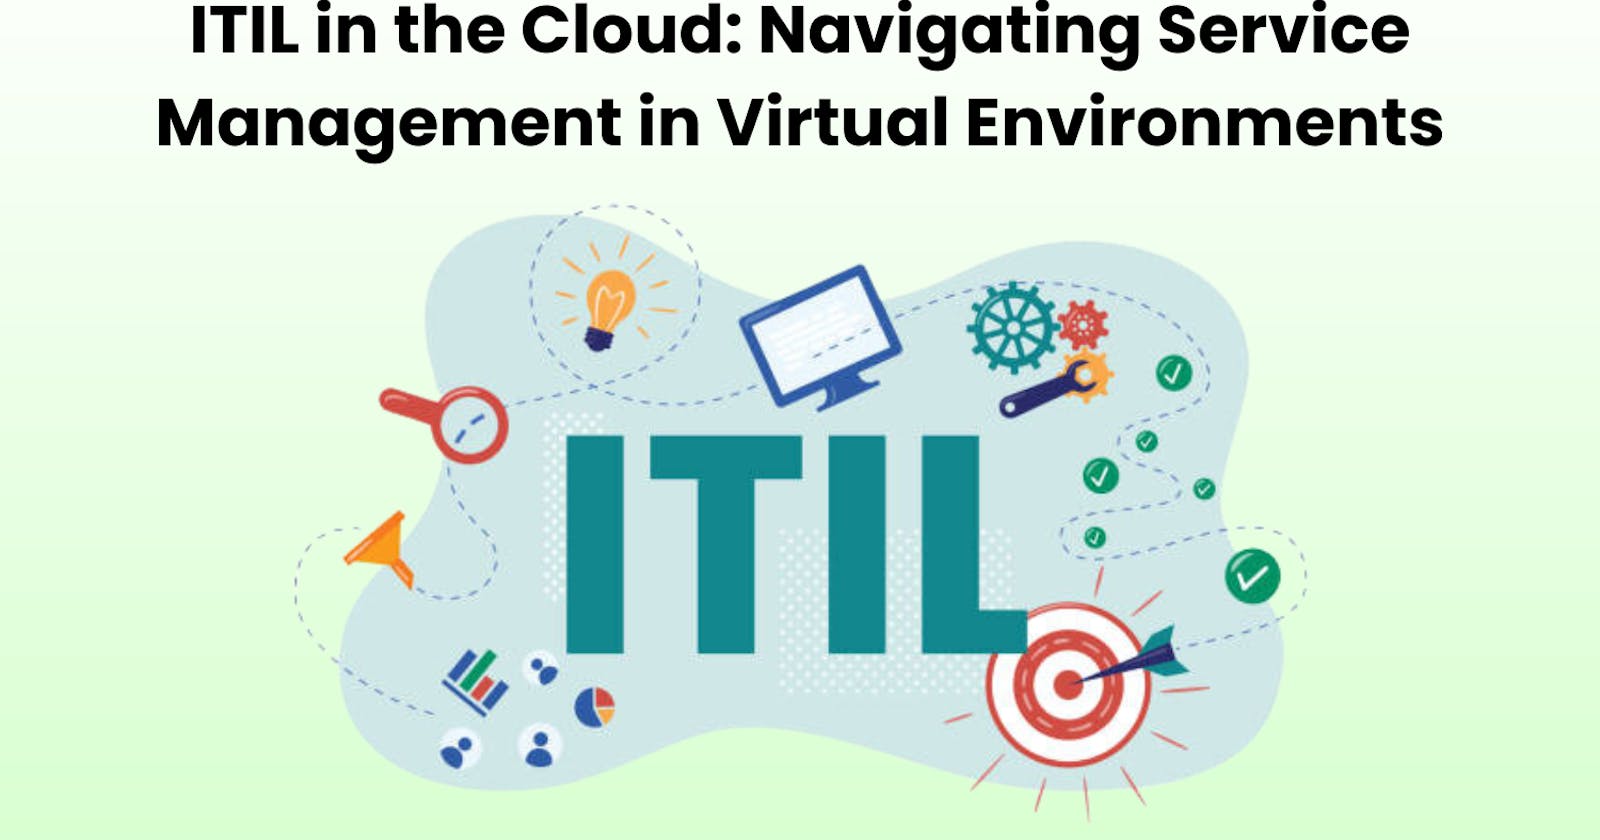 ITIL in the Cloud: Navigating Service Management in Virtual Environments